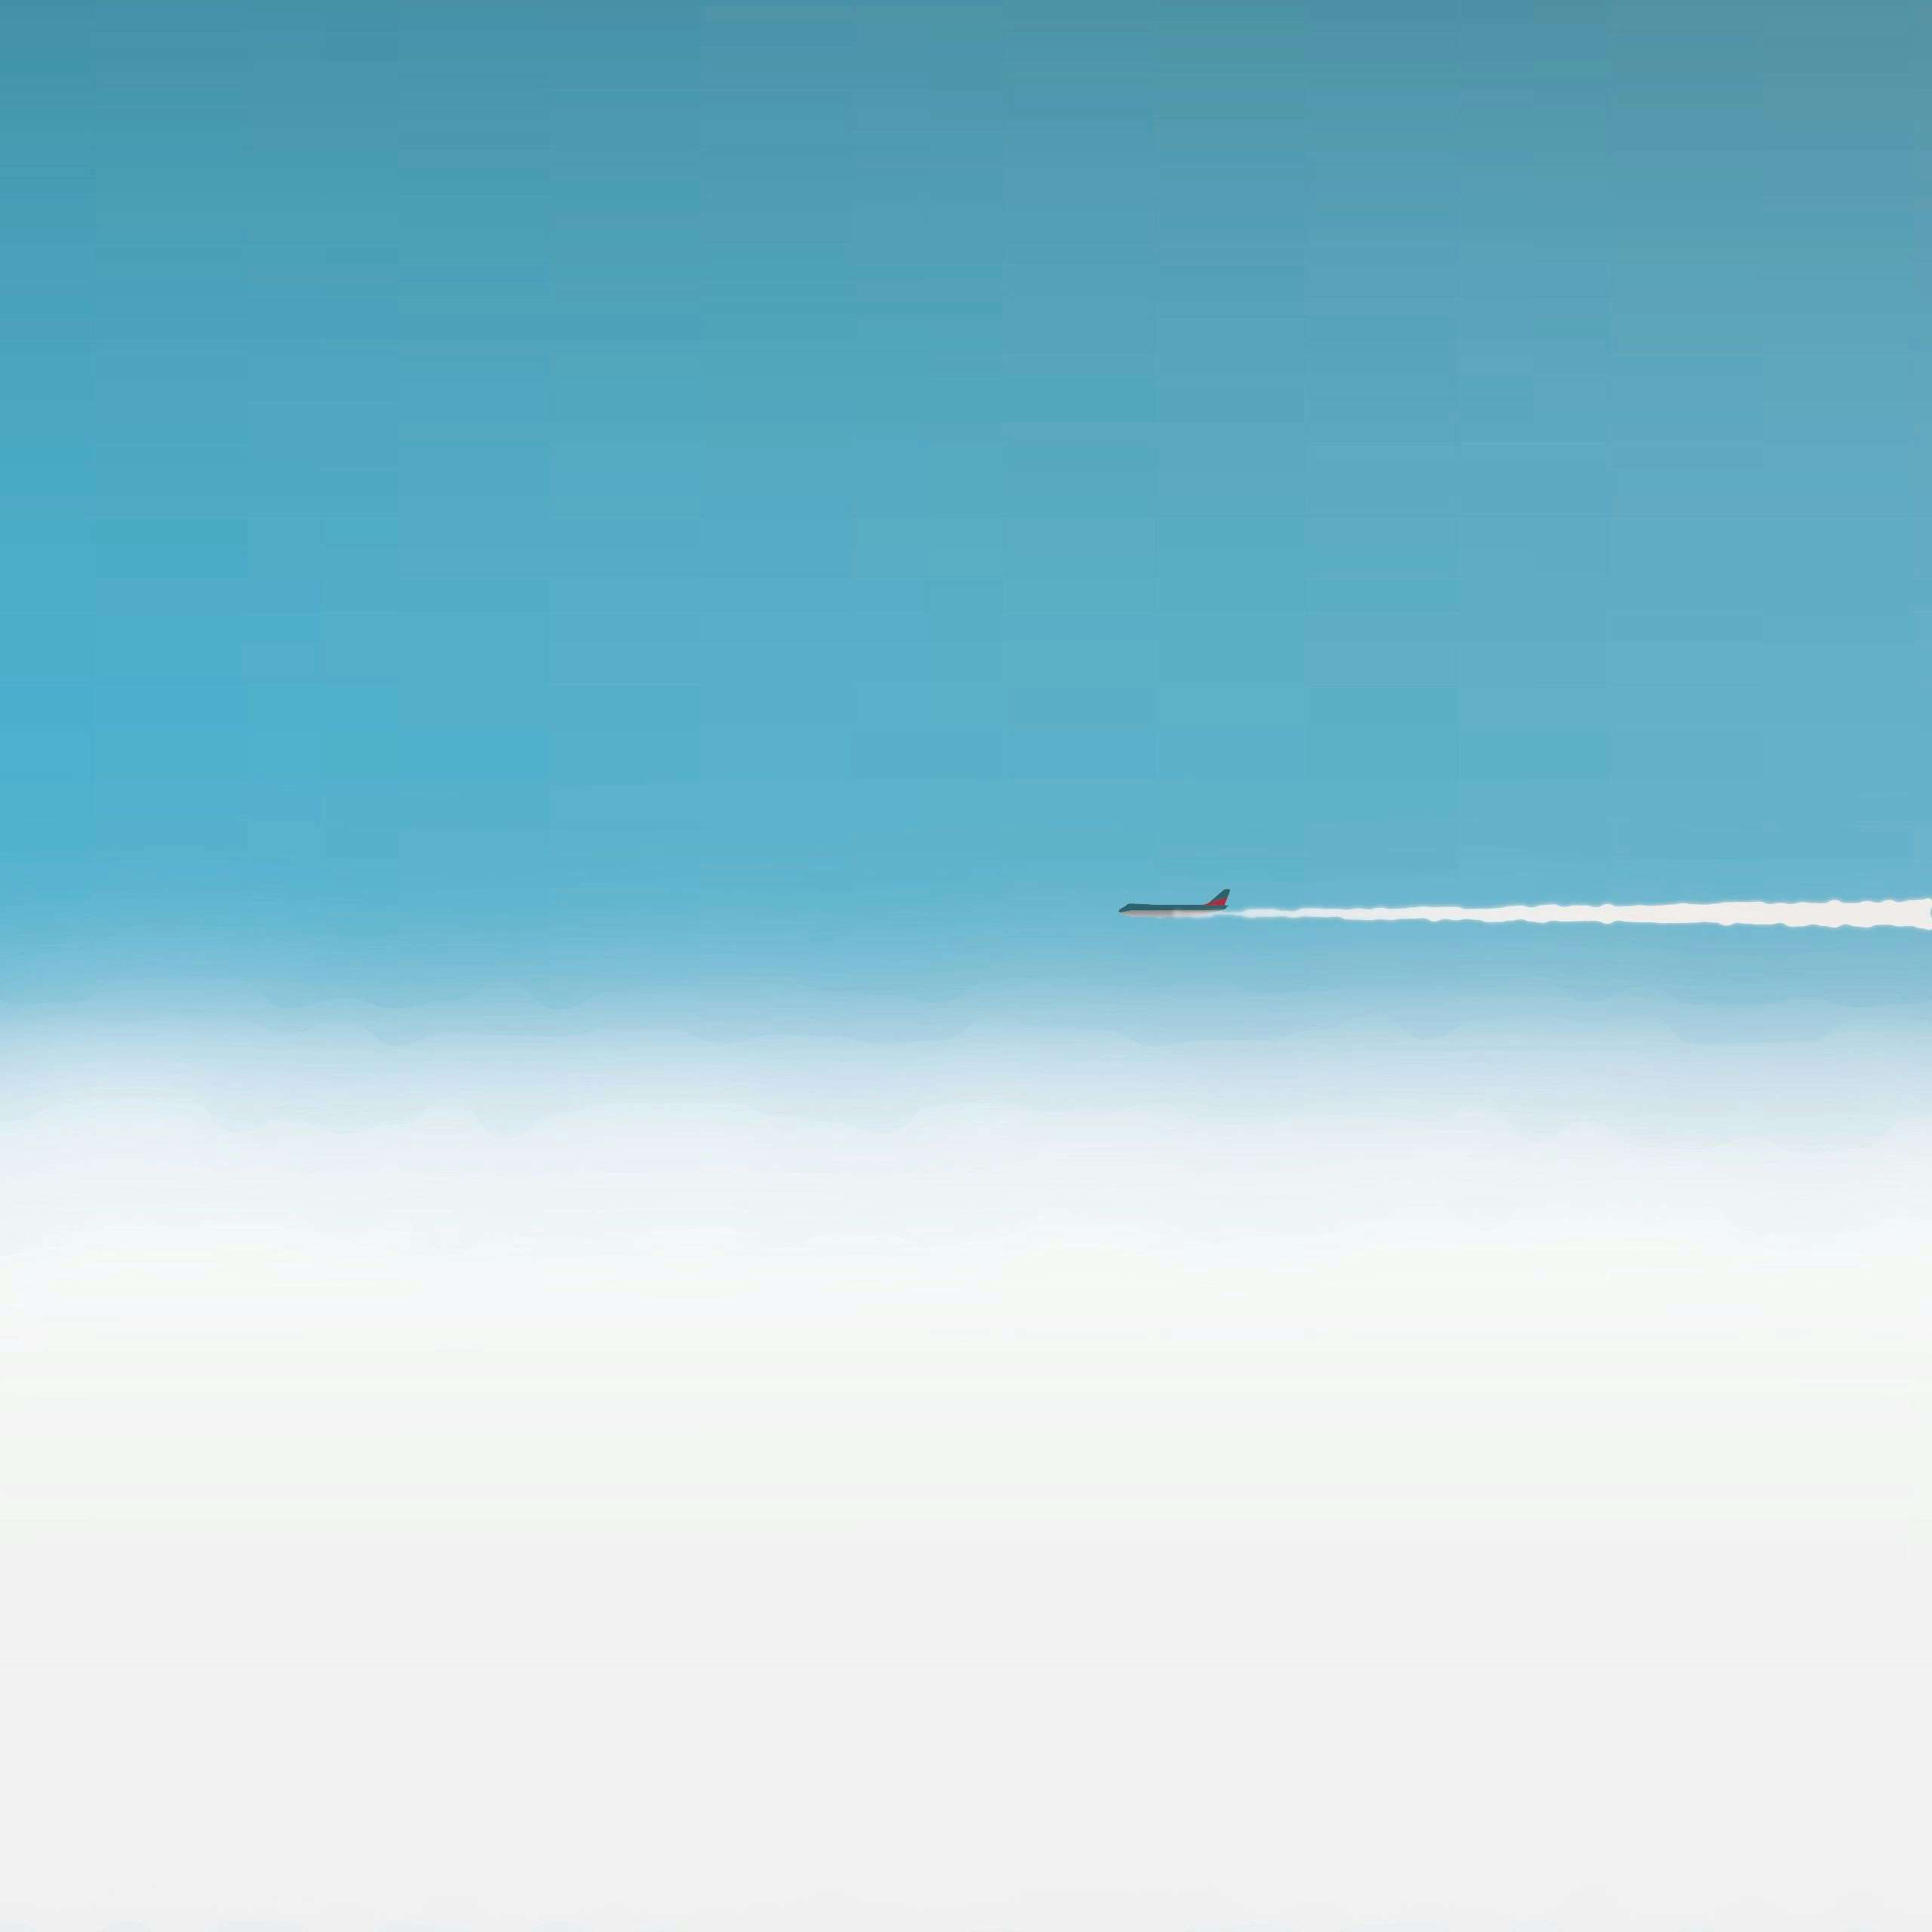 Passing jetliner above a sea of clouds illustration by Xavier Wendling